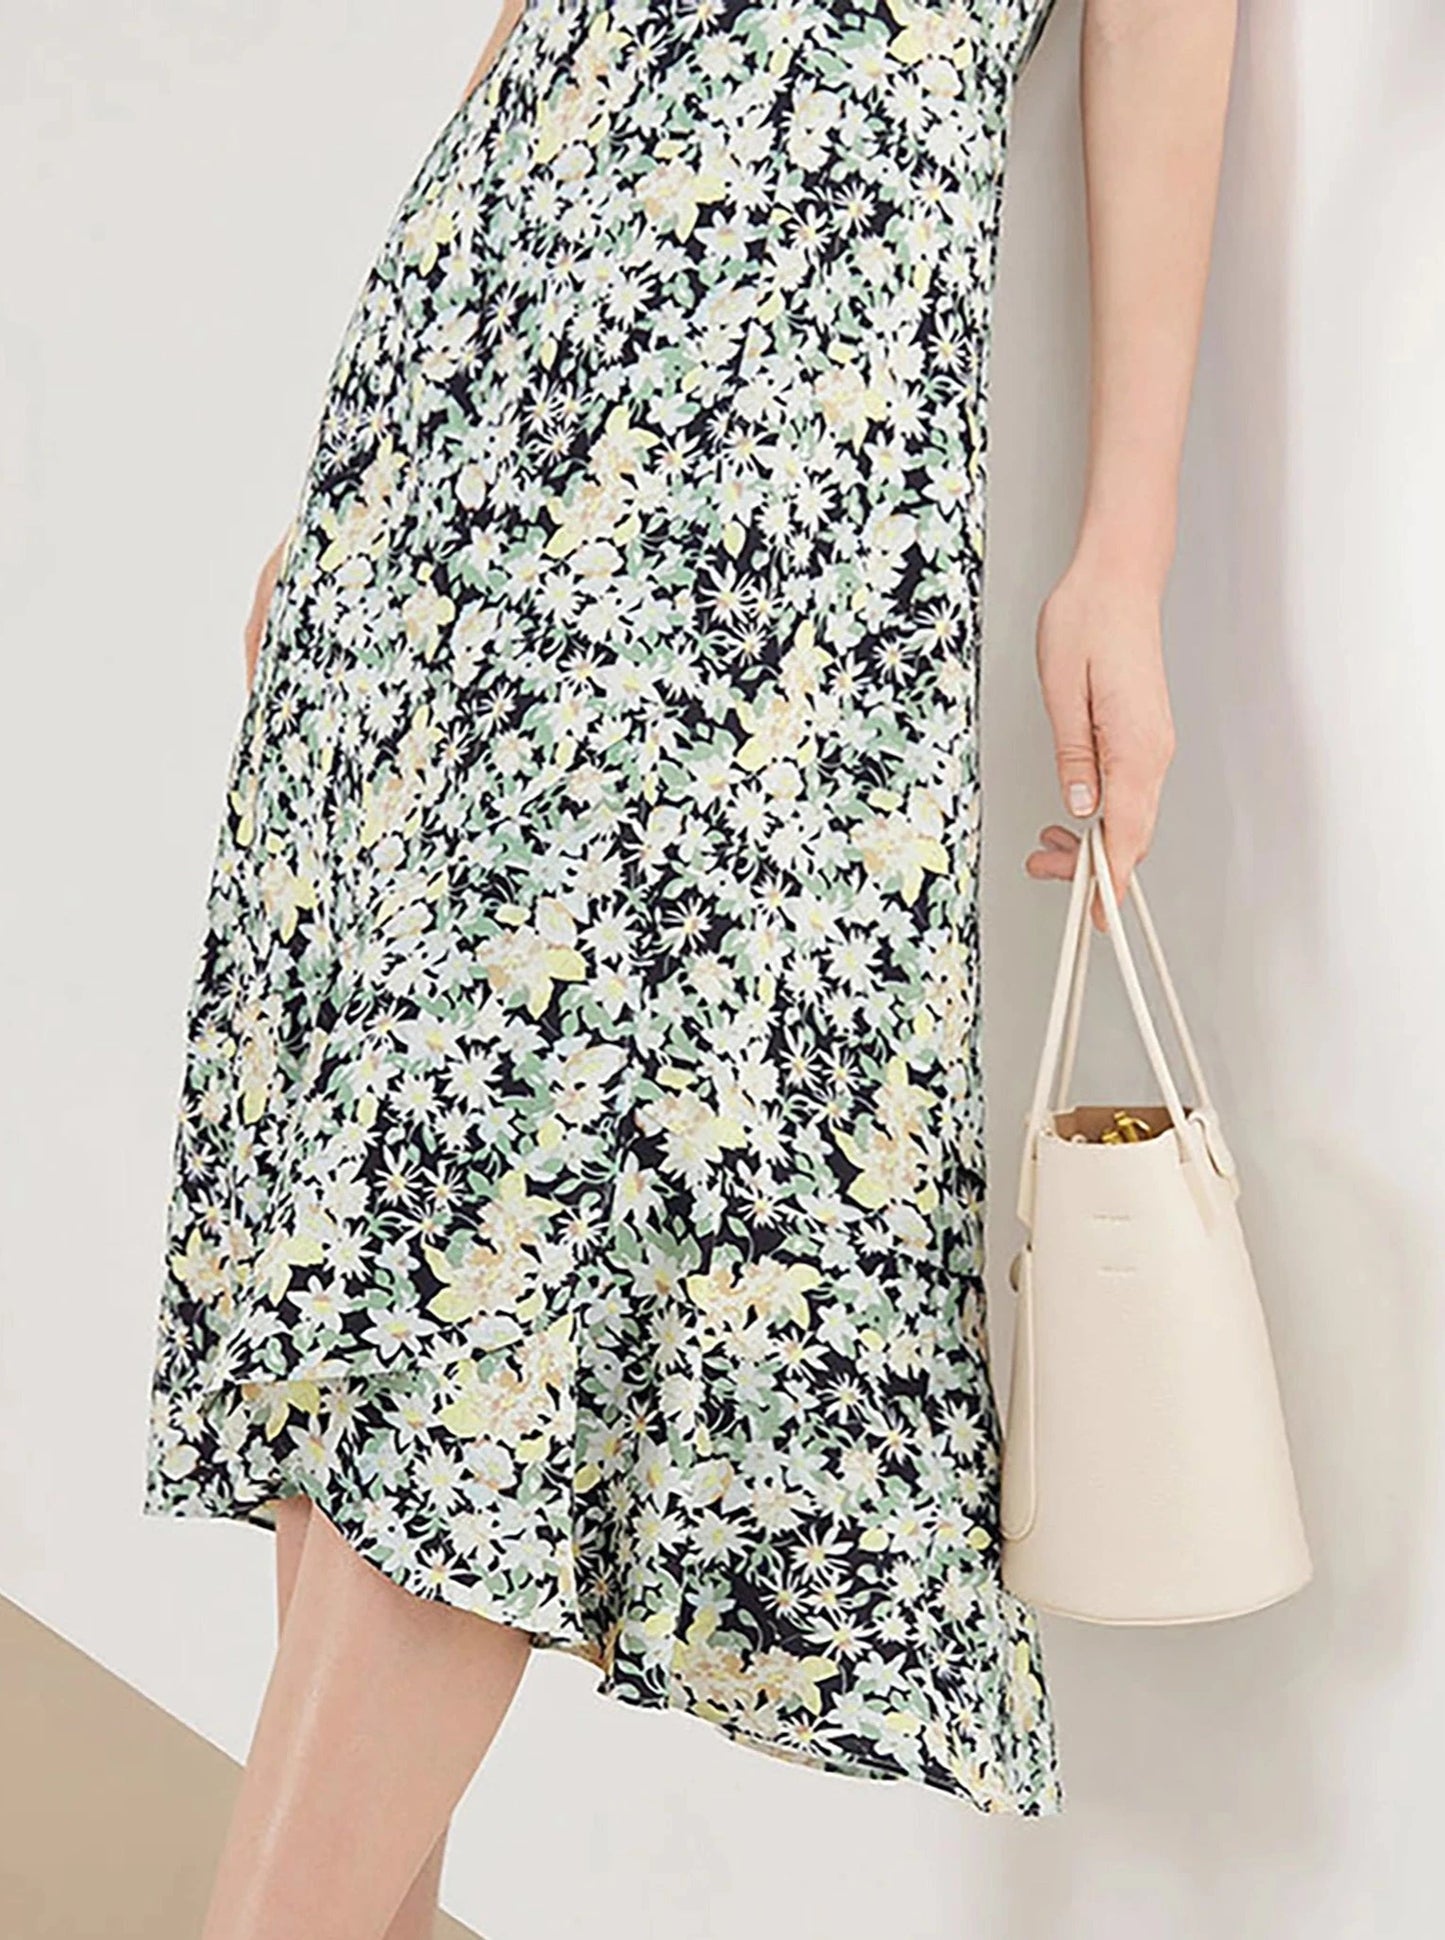 Clavicle-Showcasing Floral Dress